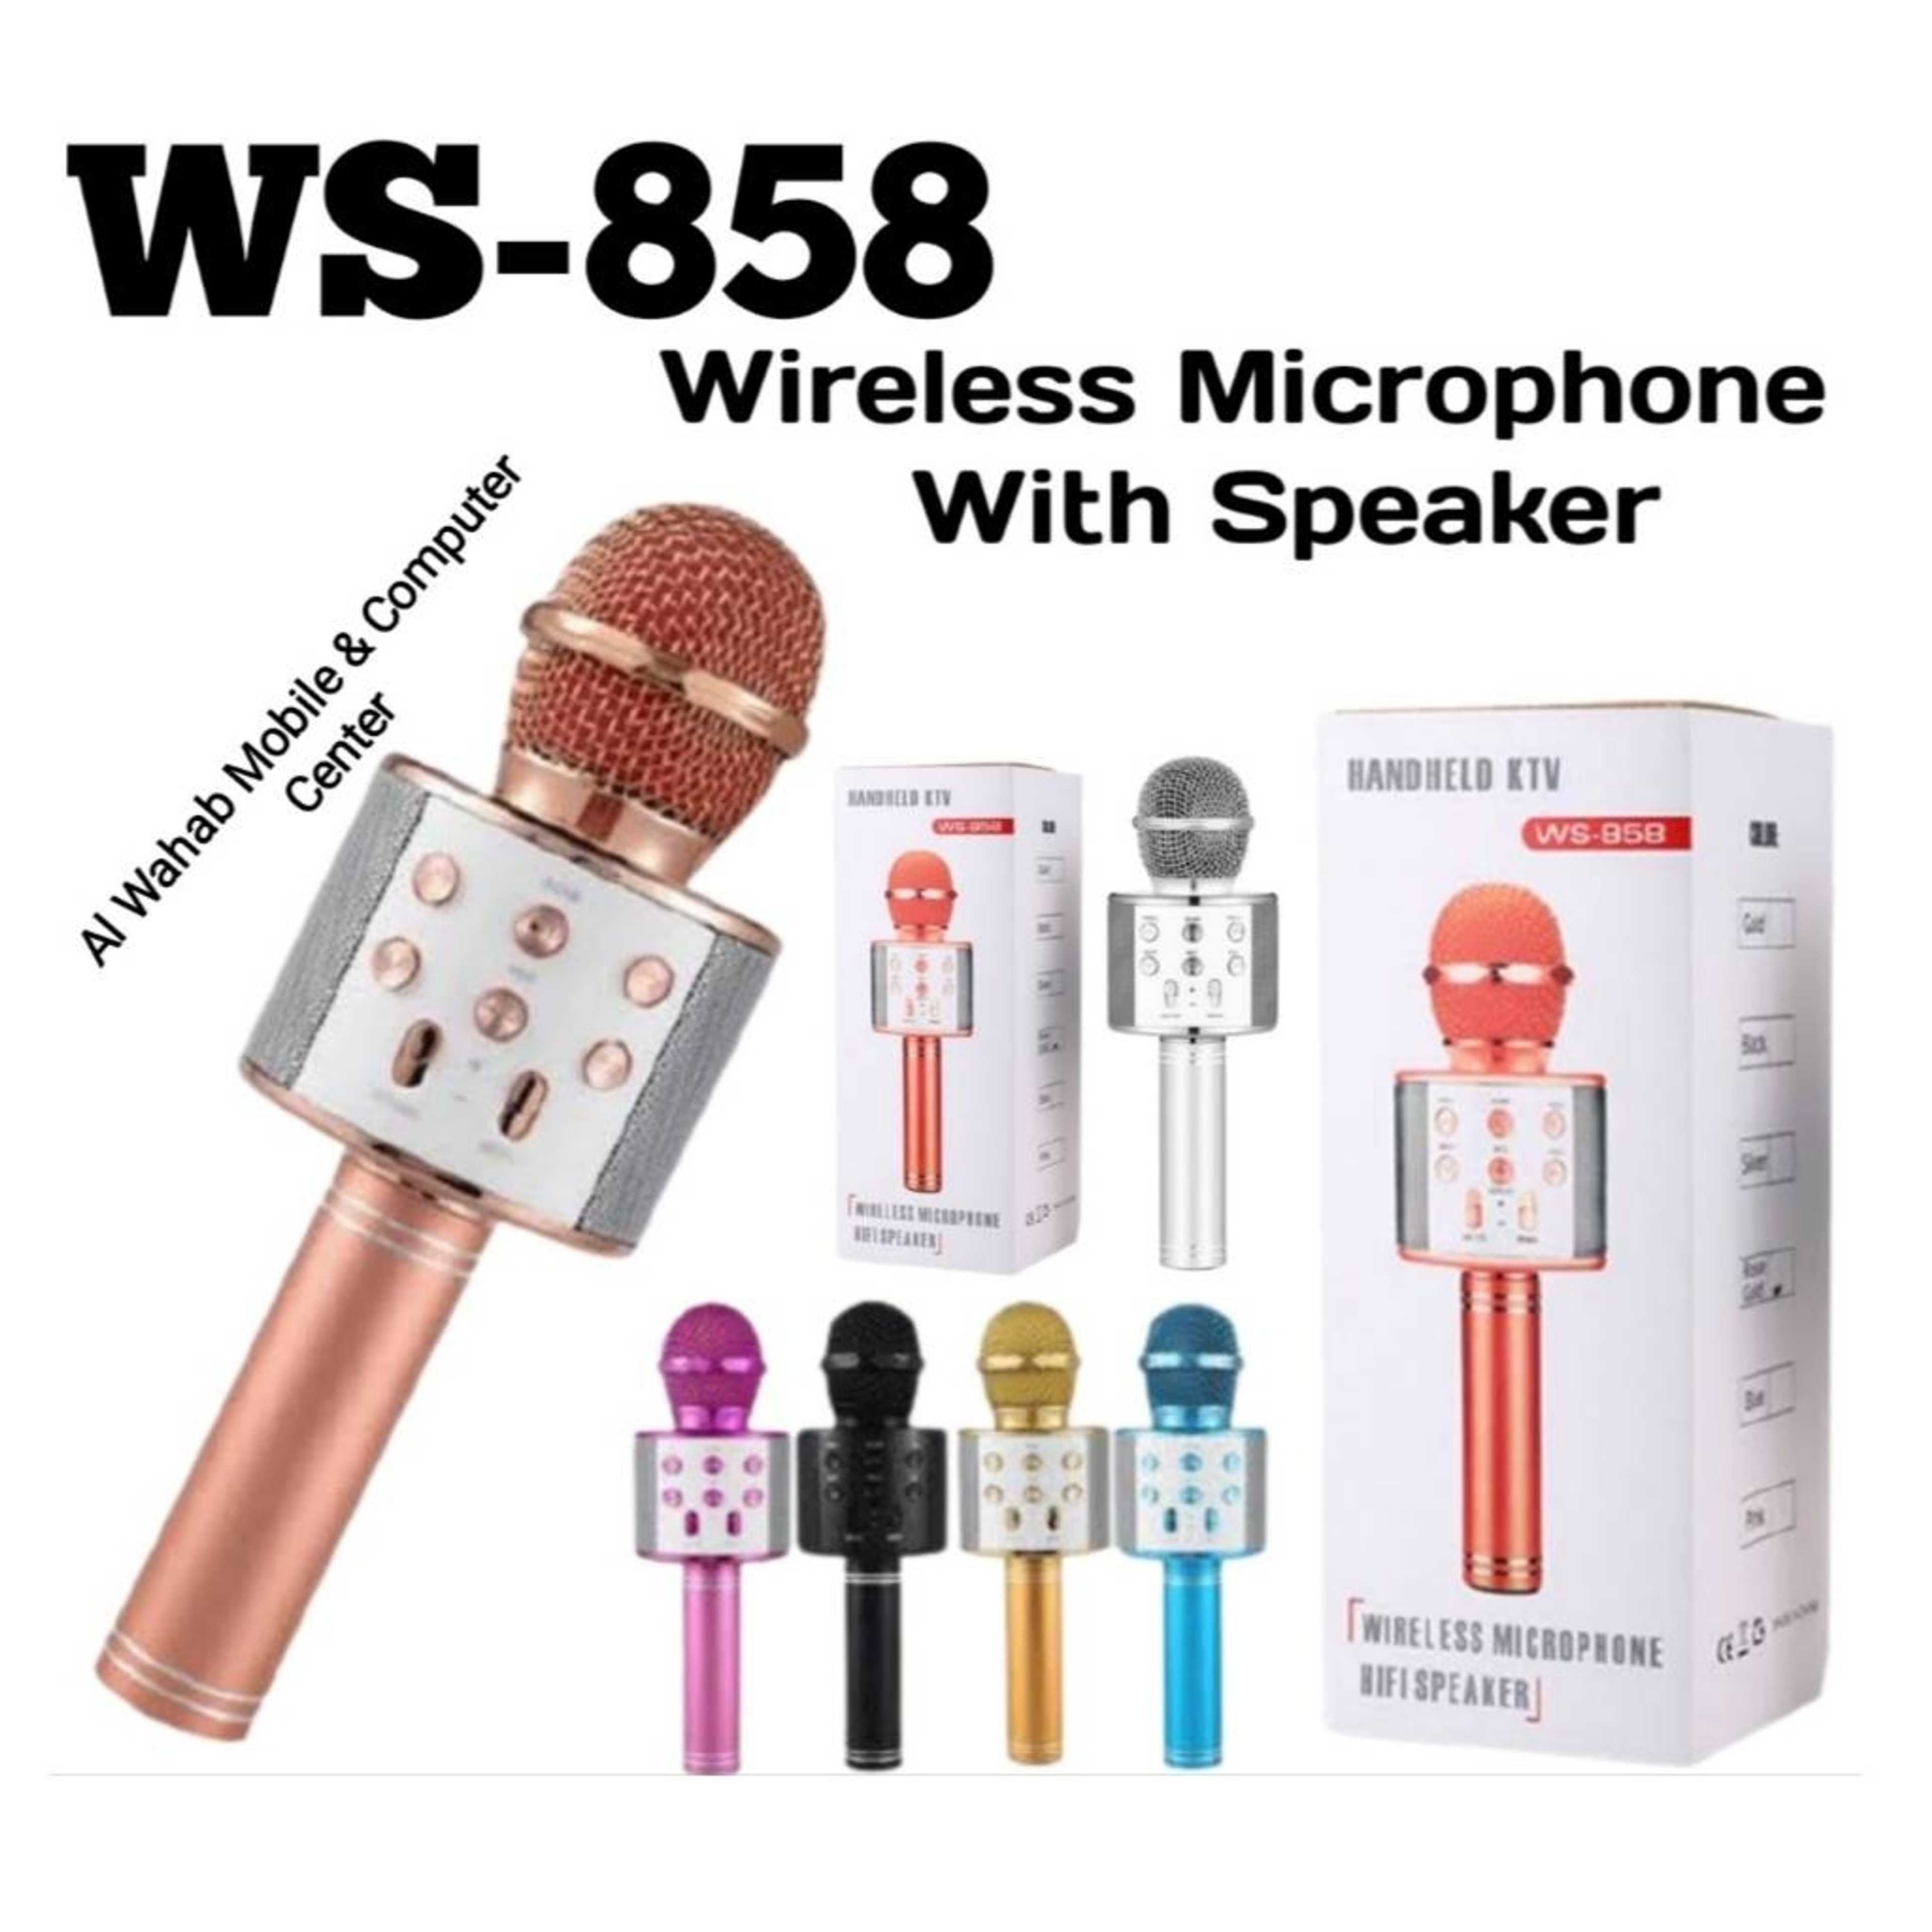 WS-858 Wireless Bluetooth Handheld Karaoke Portable Microphone with Built-in Rechargeable Speaker For Home Birthday Party Music Player Singing Recorder KTV Mic USB Mini SD Card Smartphones Laptop PC